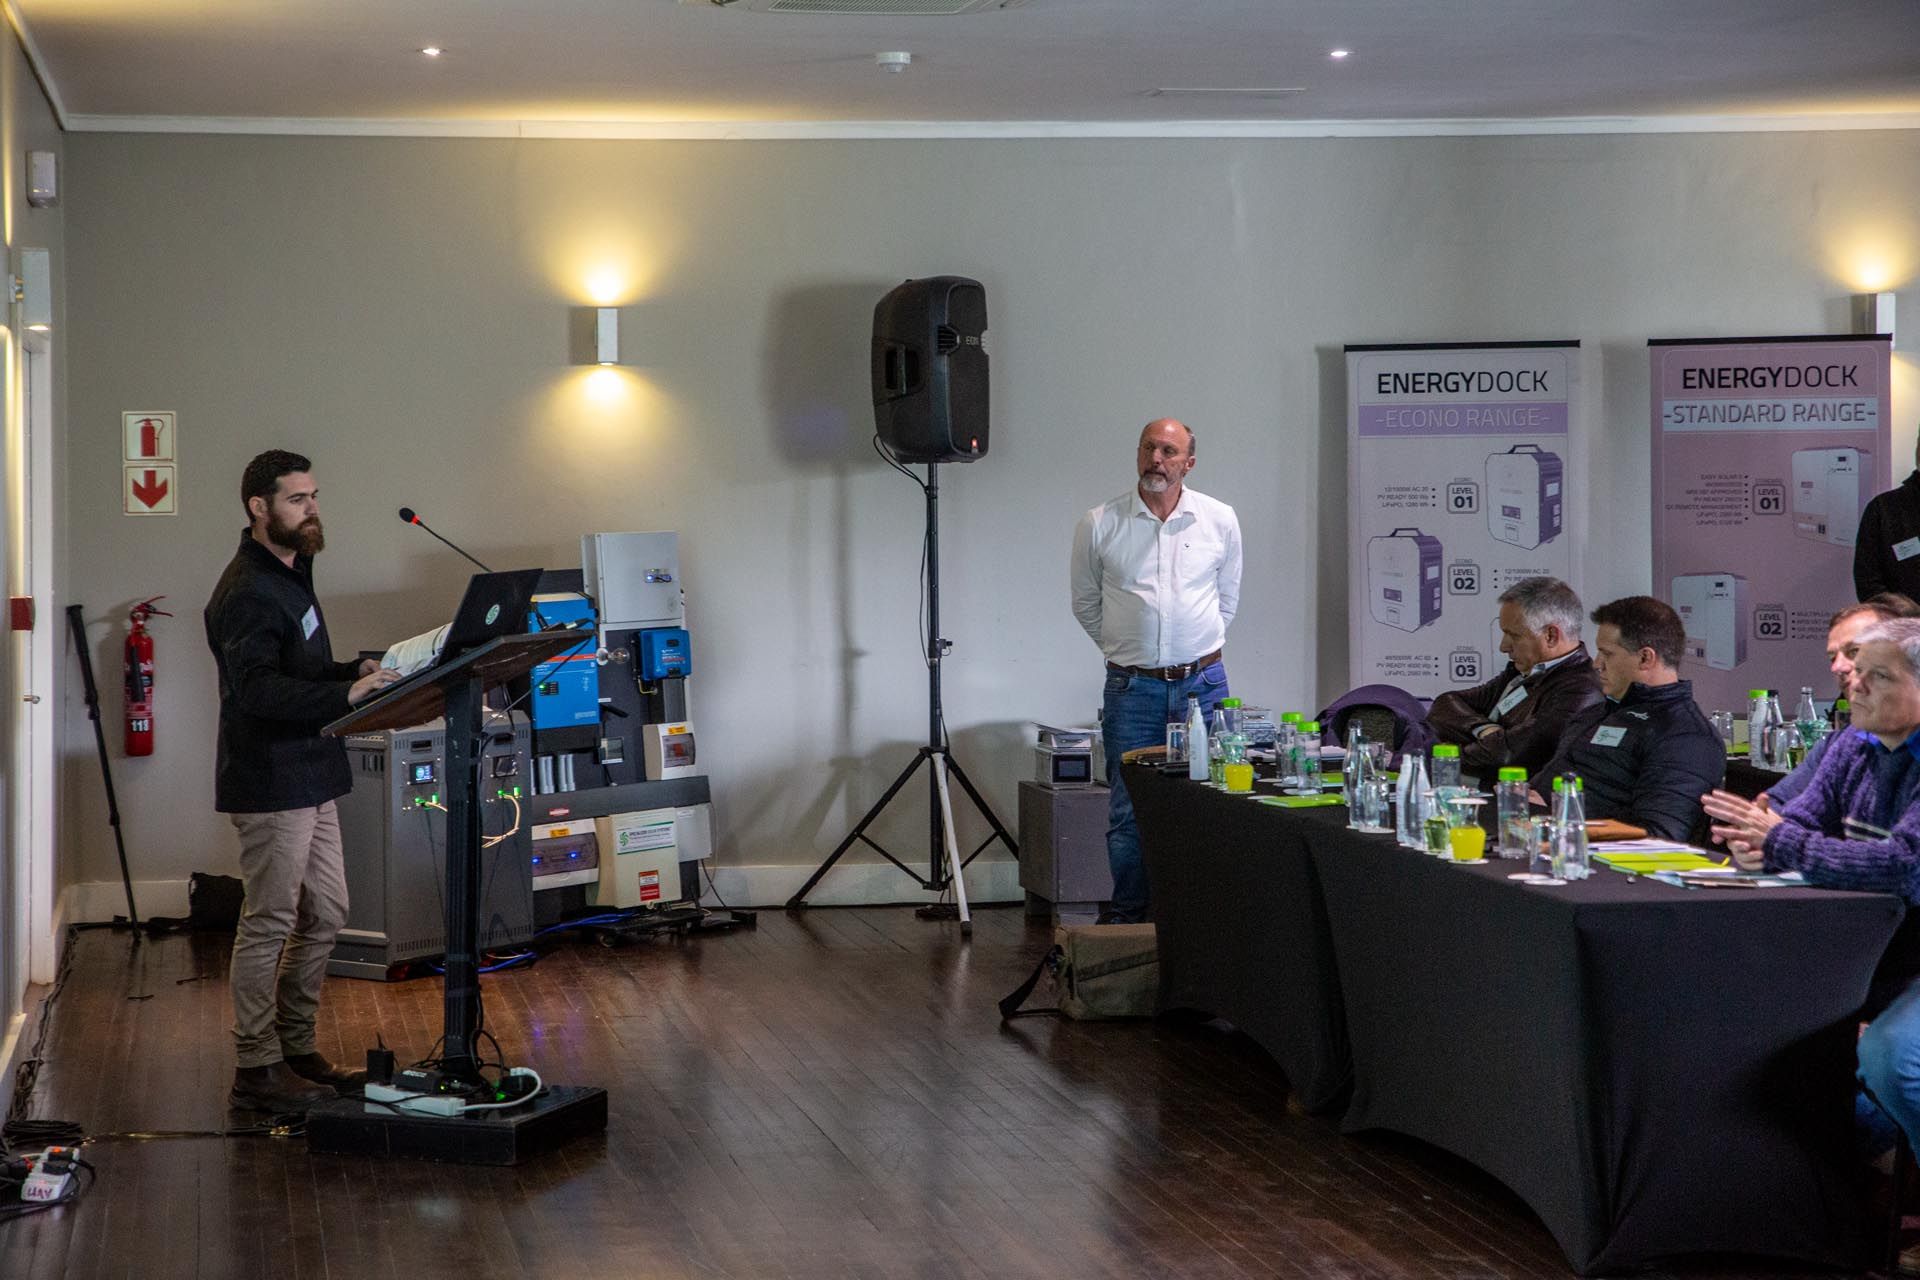 Training of attendees at conference at Fancourt George by Specialized Solar Systems Gerrie Rossouw